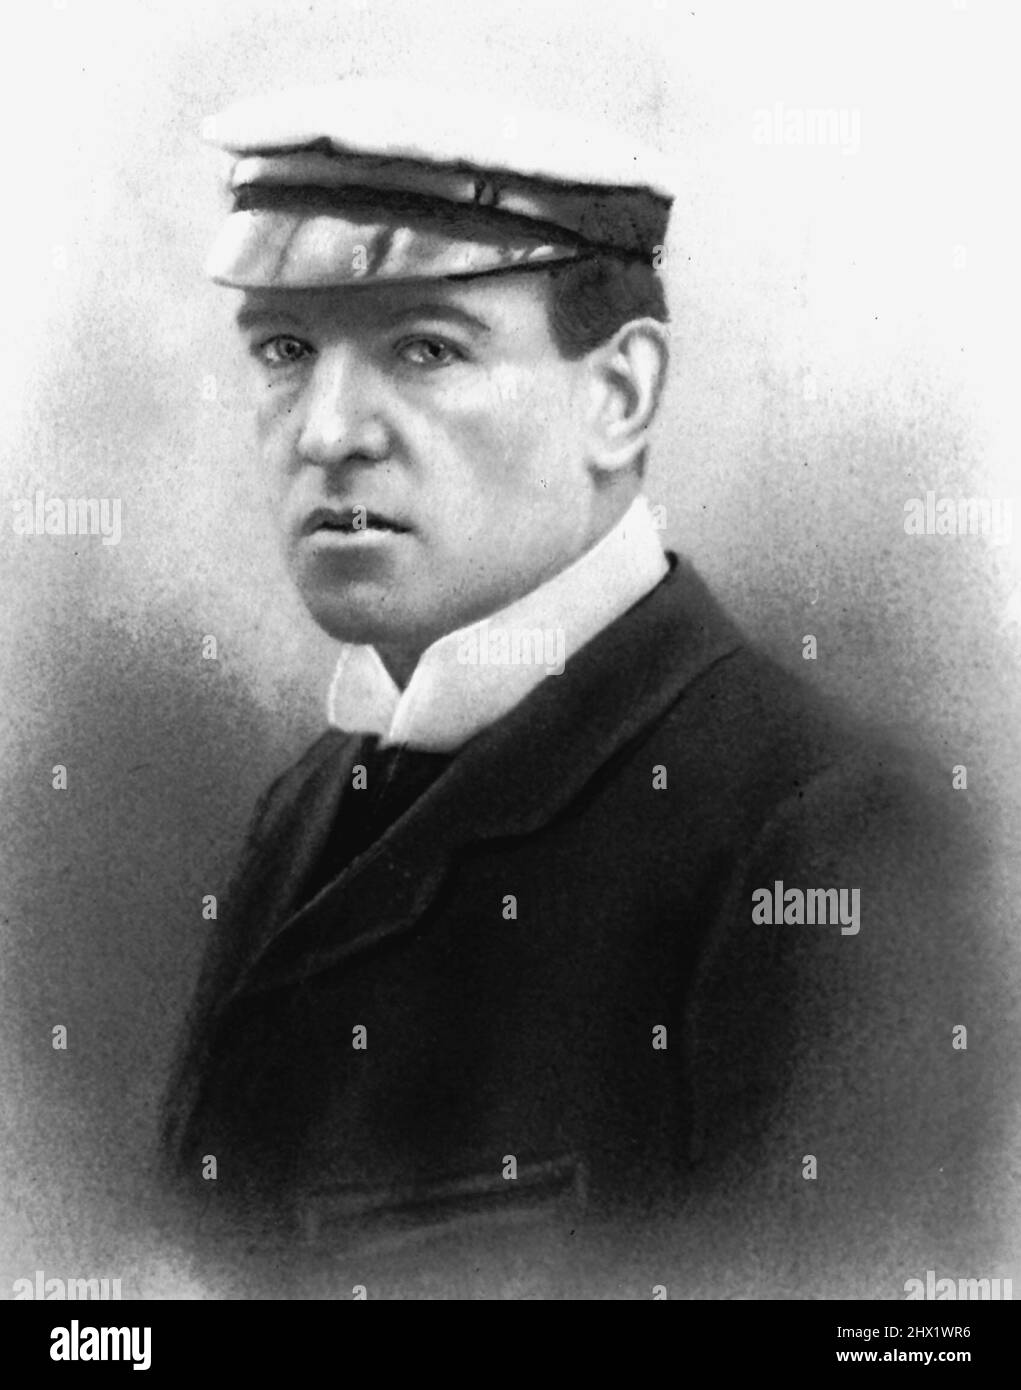 Undated file photo of Sir Ernest Shackleton. One hundred years after Shackleton's death, Endurance was found at a depth of 3008 metres in the Weddell Sea, within the search area defined by the expedition team before its departure from Cape Town, and approximately four miles south of the position originally recorded by Captain Worsley. Issue date: Wednesday March 9, 2022. Stock Photo